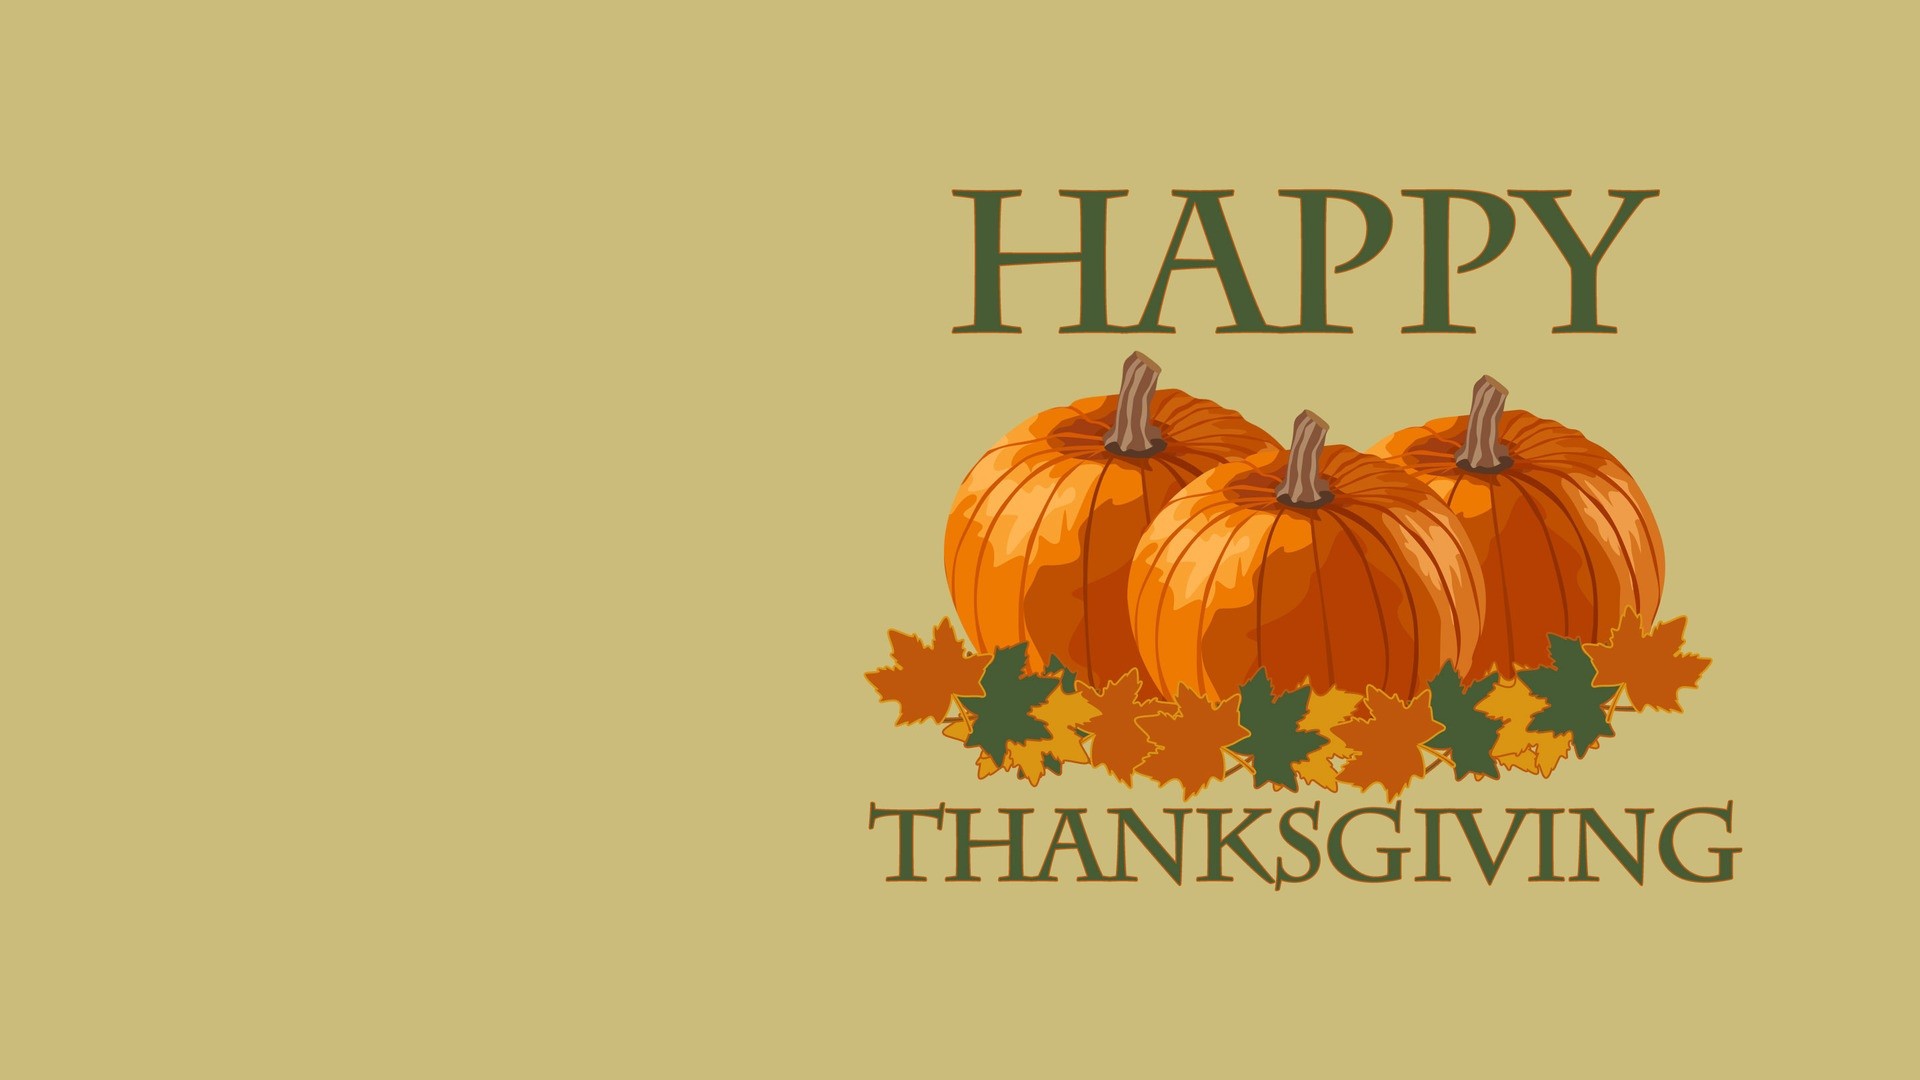 1920x1080 Thanksgiving wallpapers 2013, 2013 Thanksgiving day greetings .